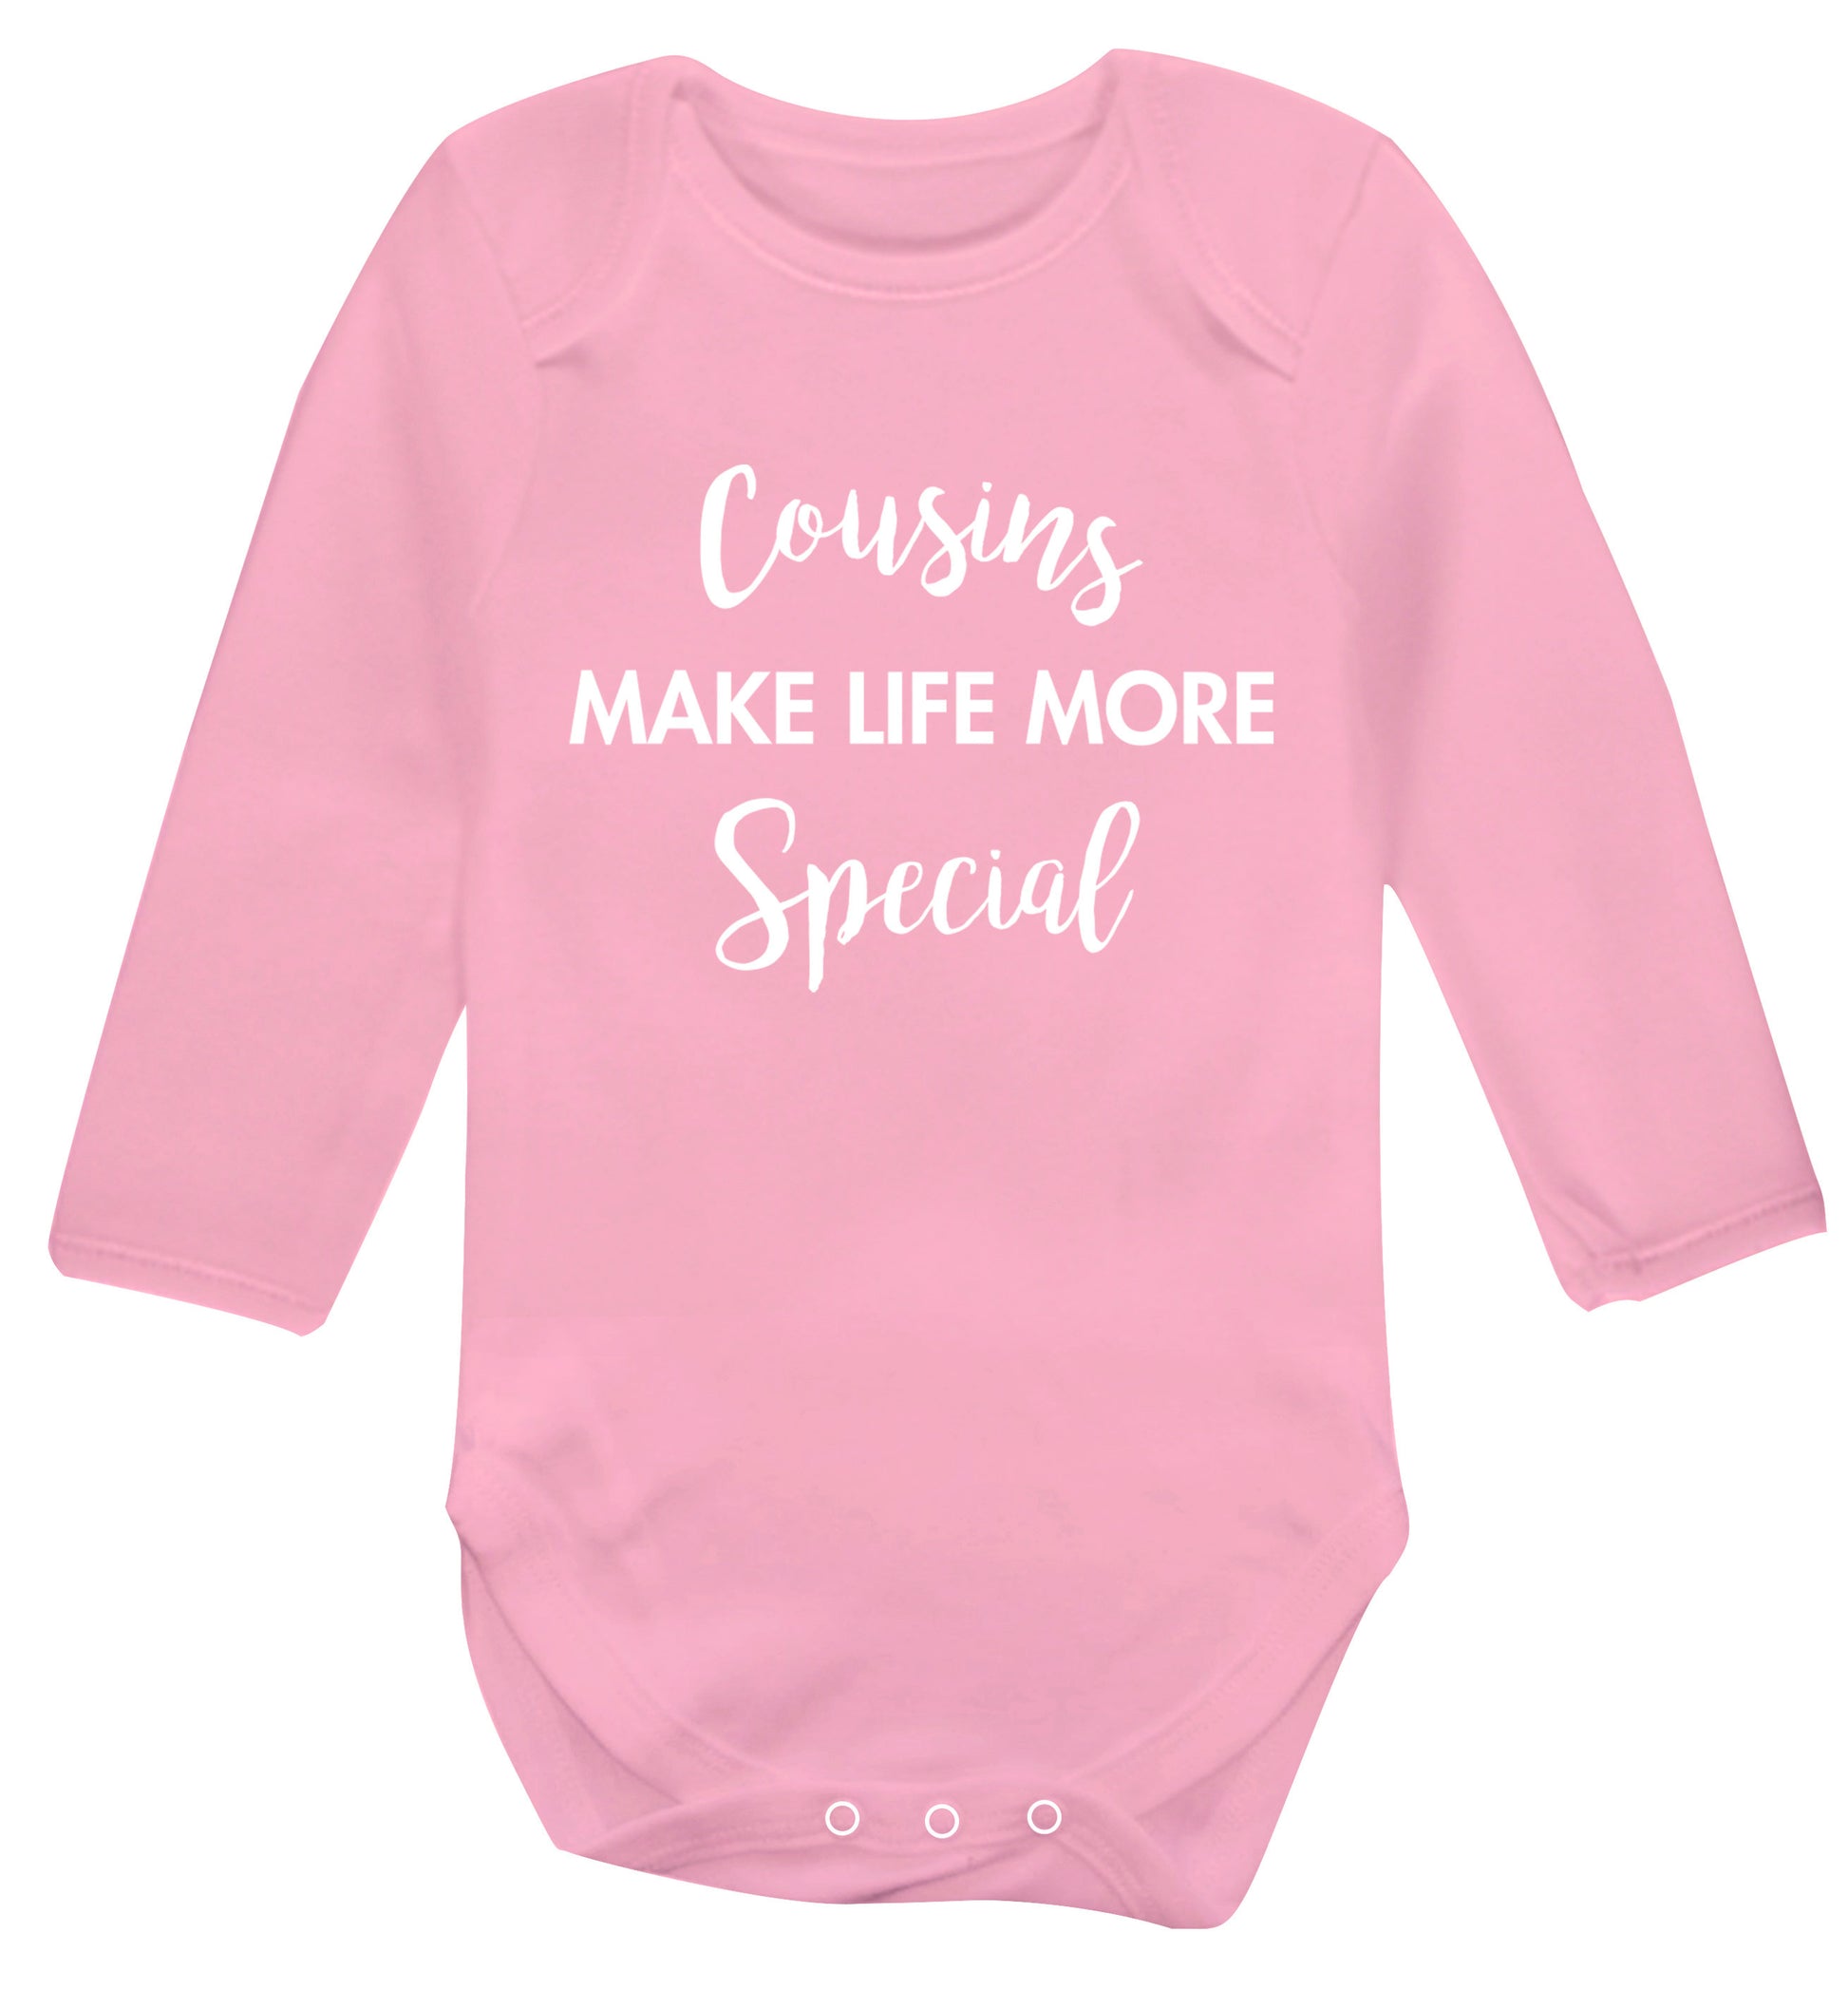 Cousins make life more special Baby Vest long sleeved pale pink 6-12 months